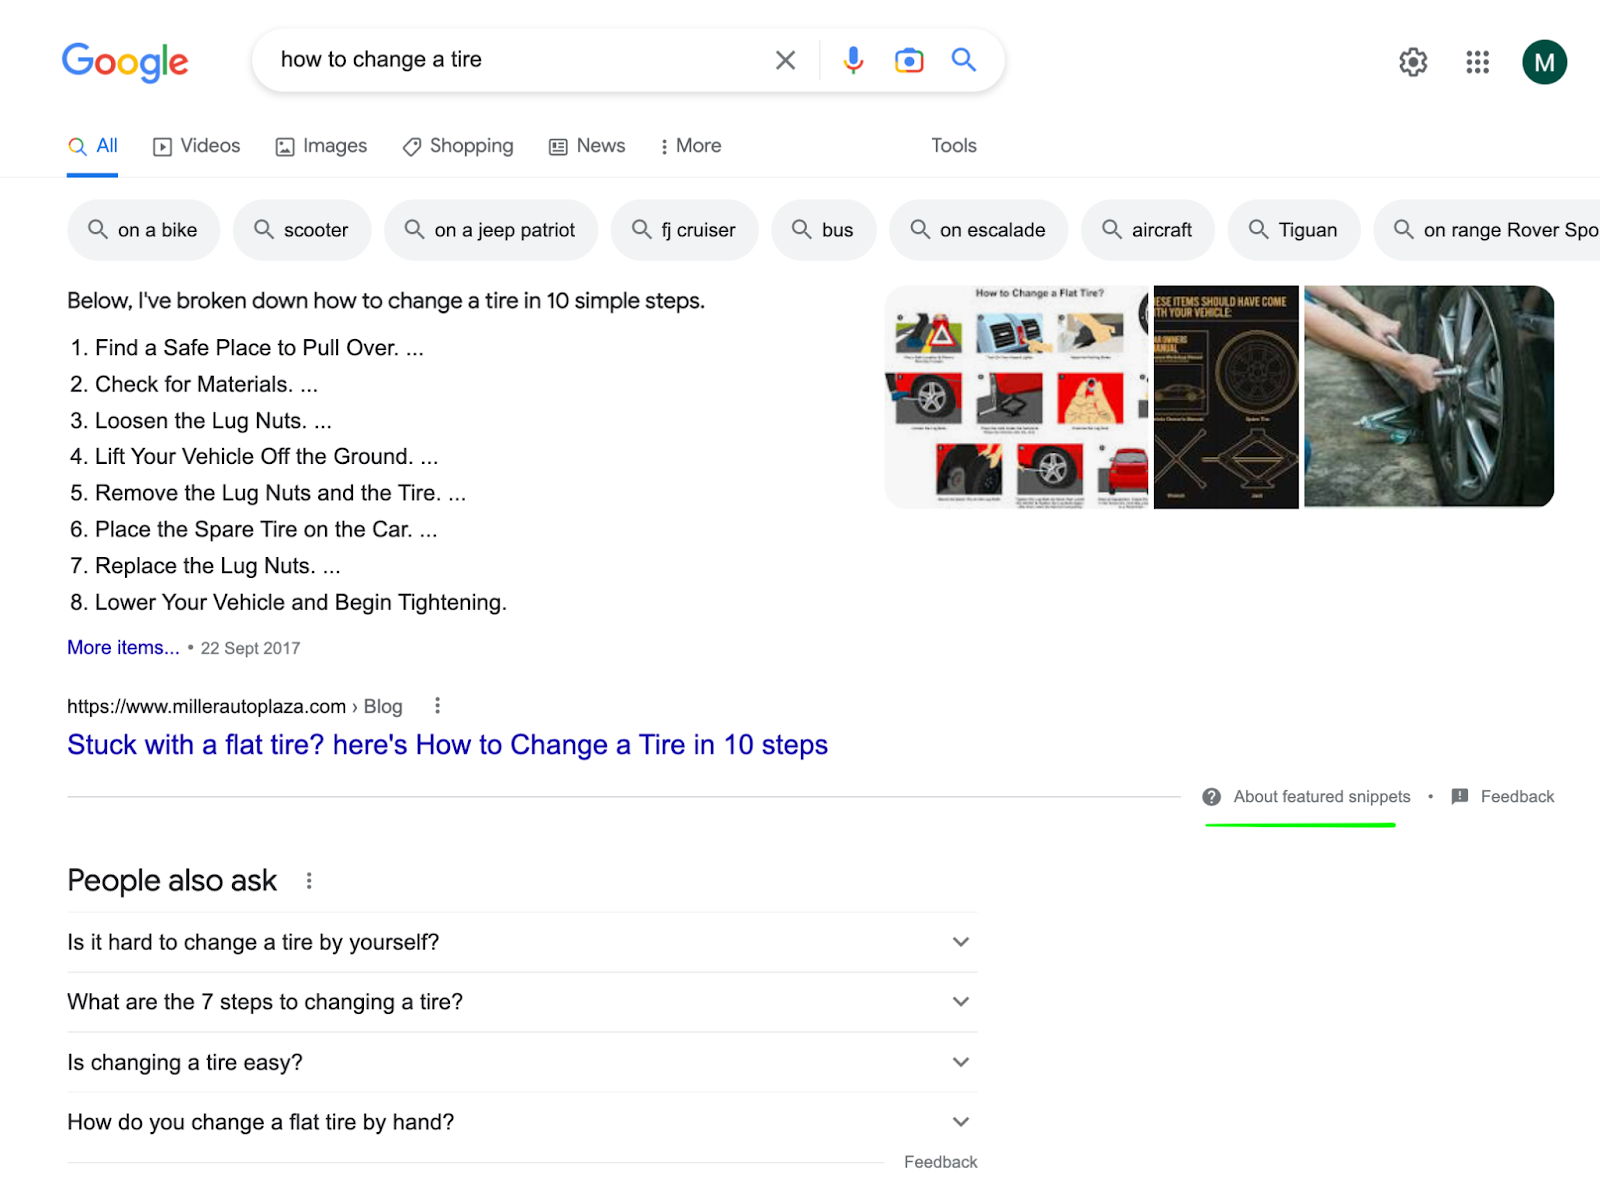 This featured snippet could become Google Bard in the future